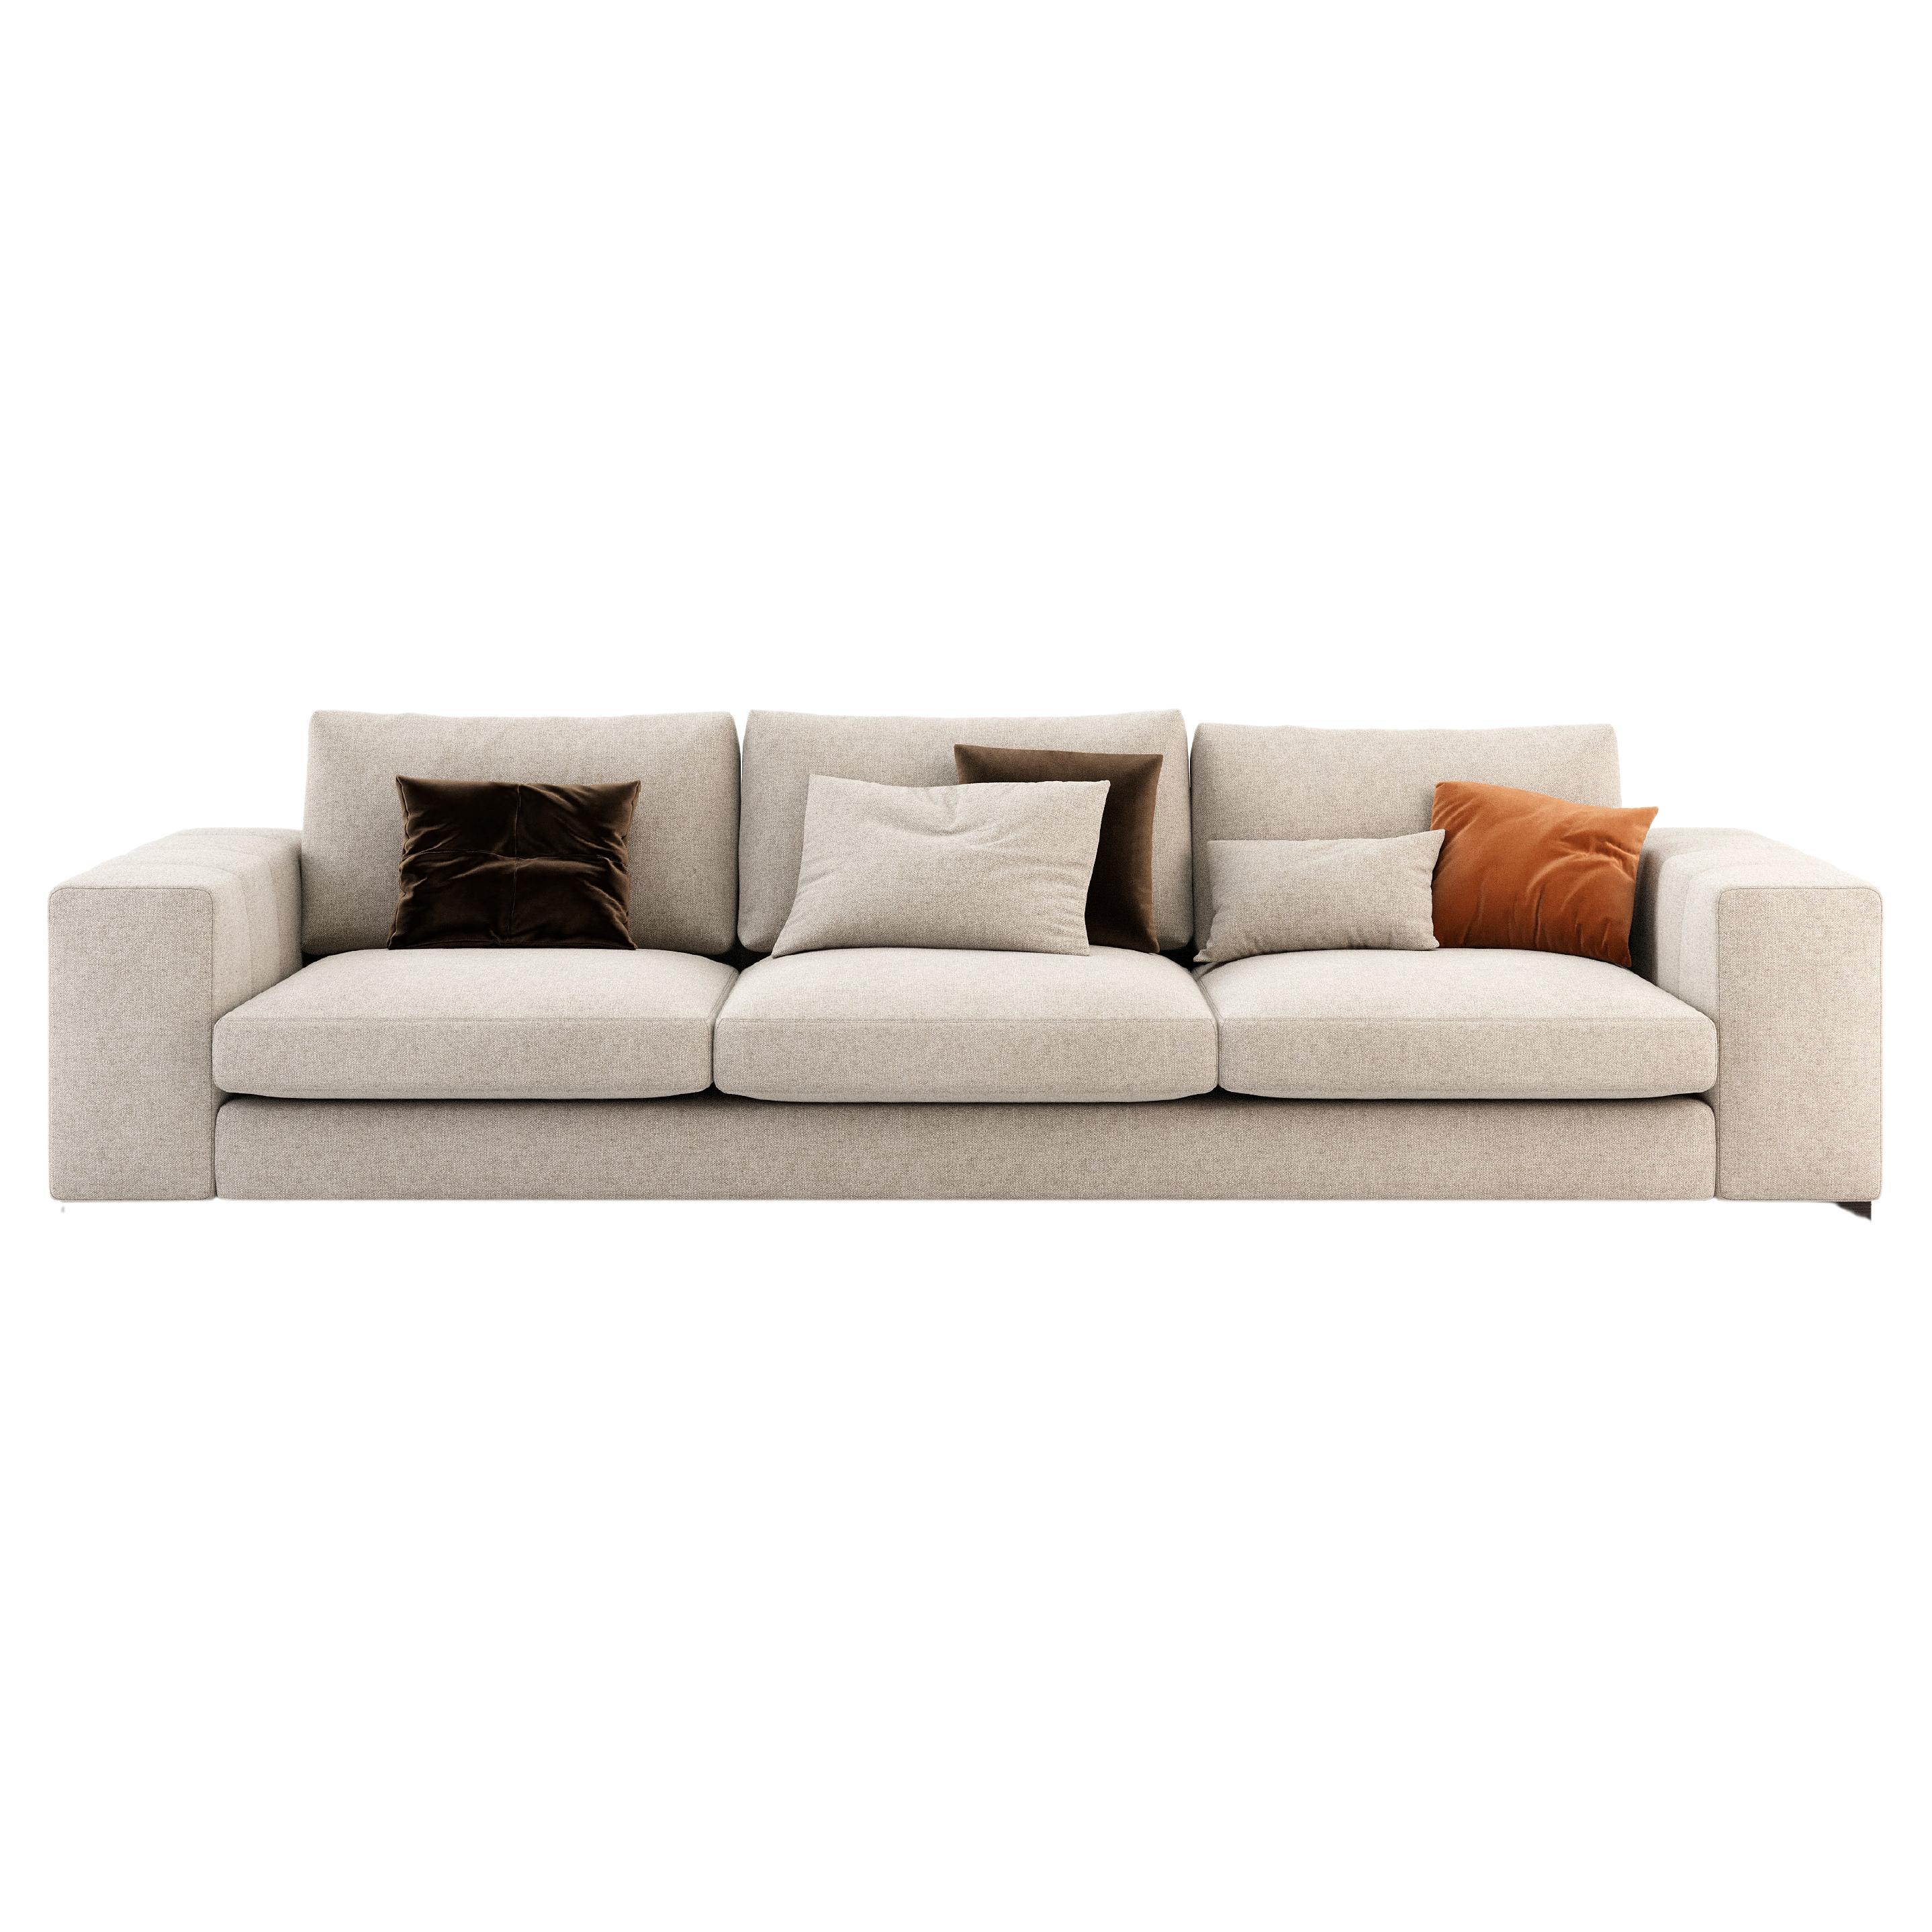 Charlie couch with contemporary design fully customisable For Sale